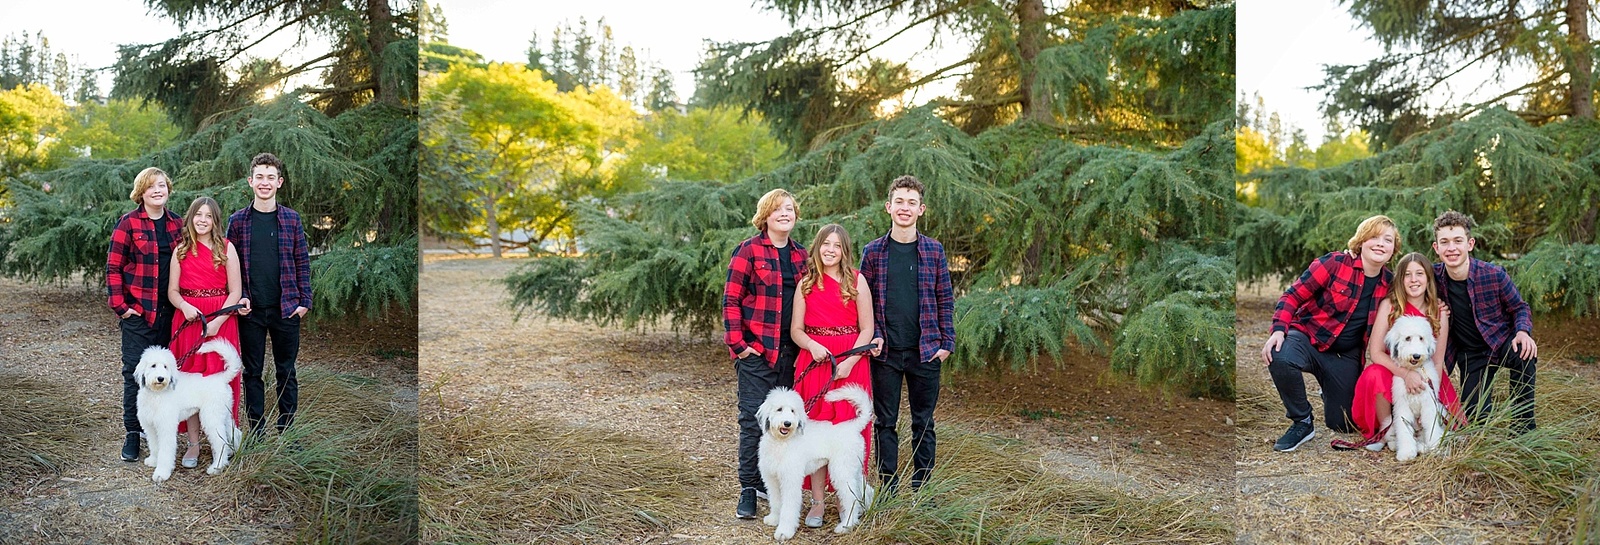 Wooded family photo in the South Bay